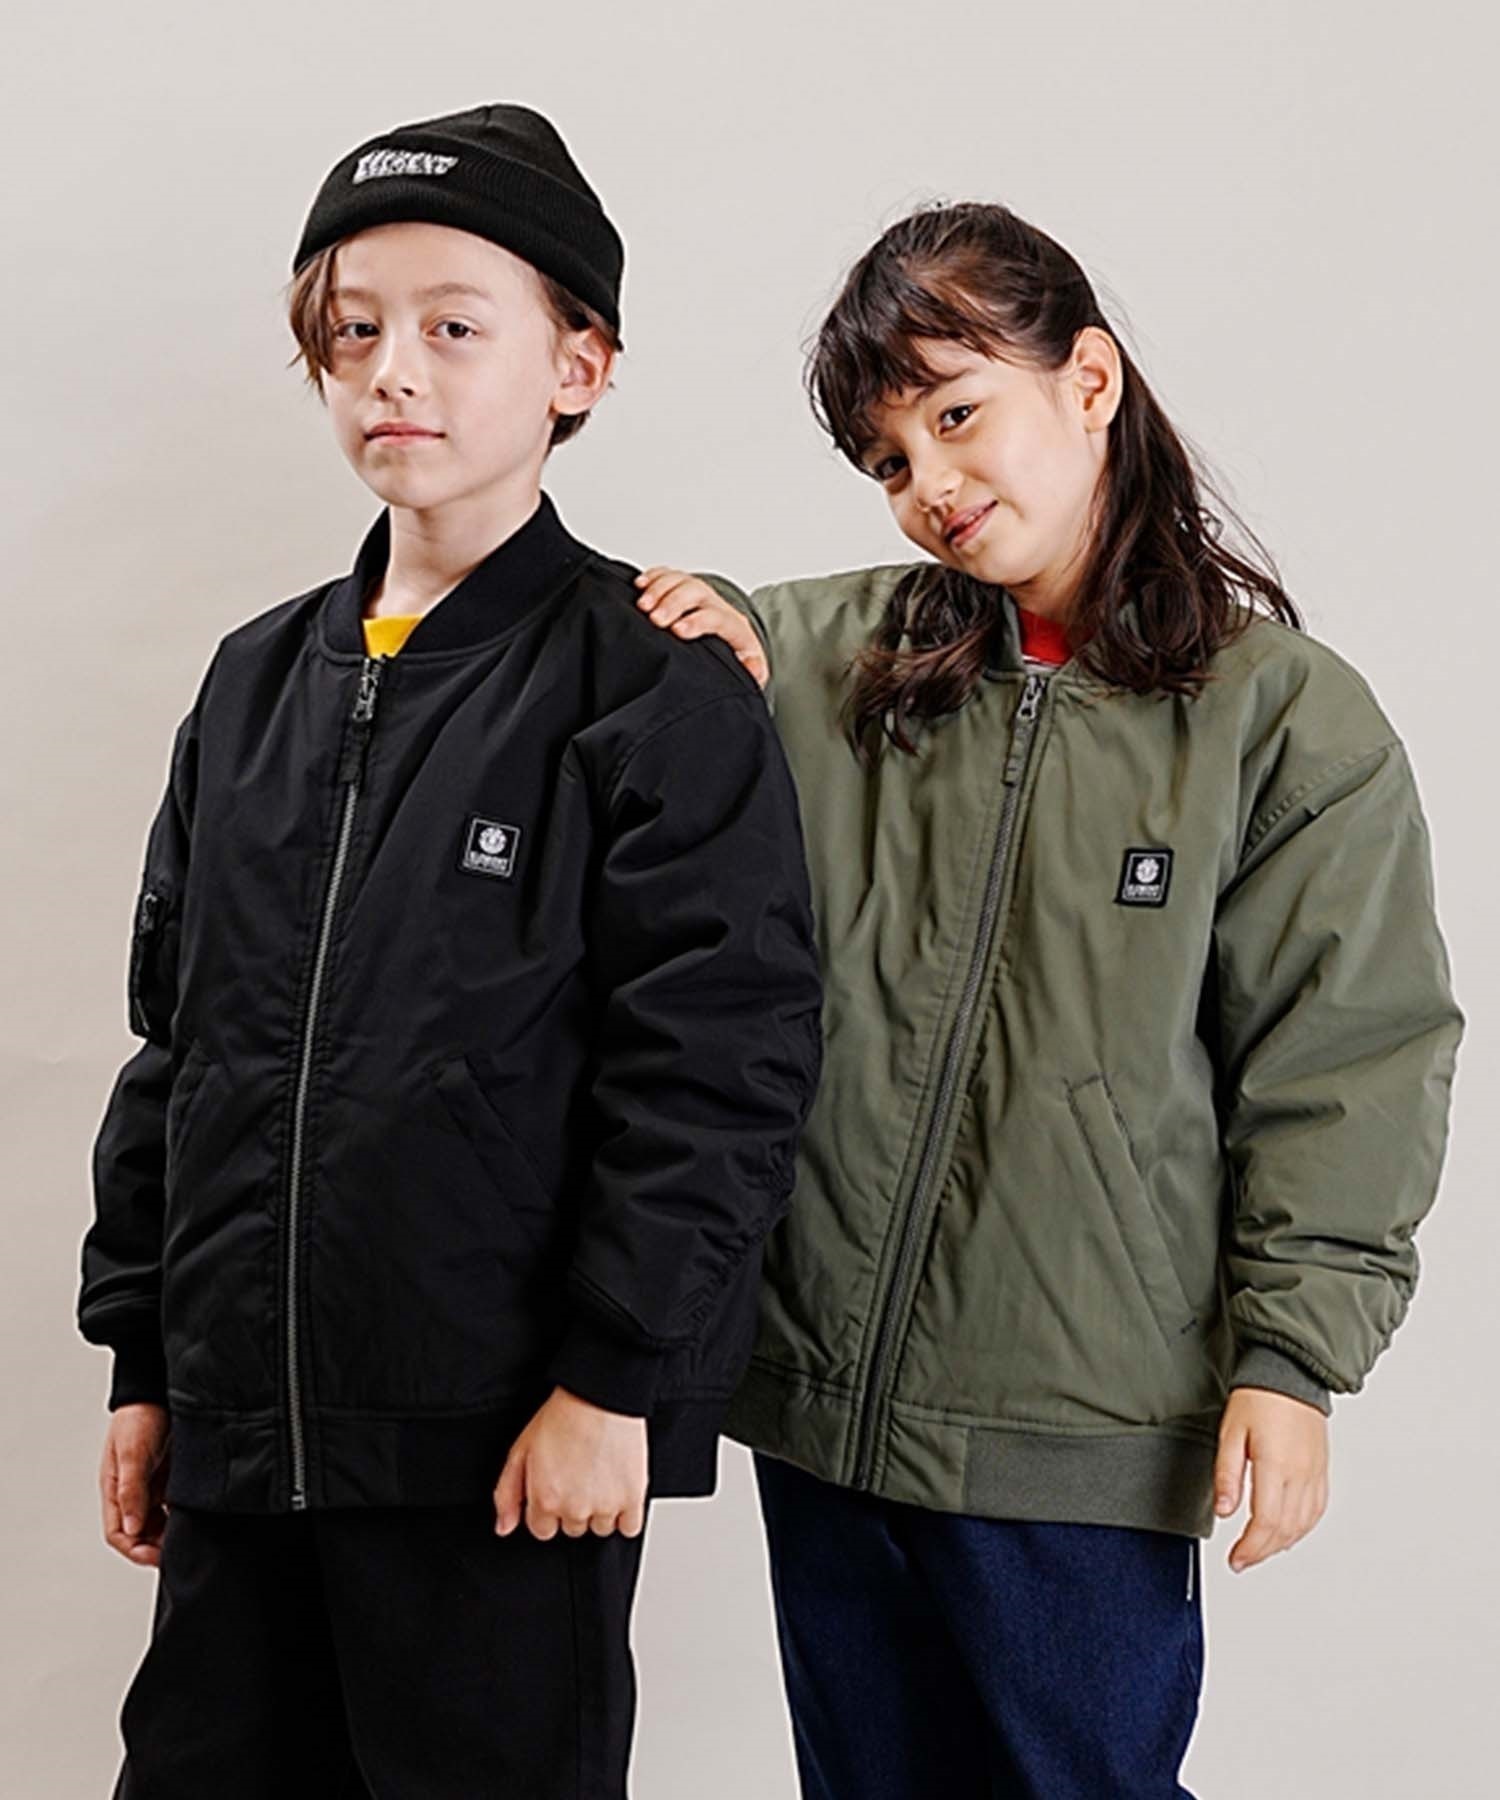 ELEMENT/エレメント DULCEY SOLID YOUTH キッズ アウター ジャケット 